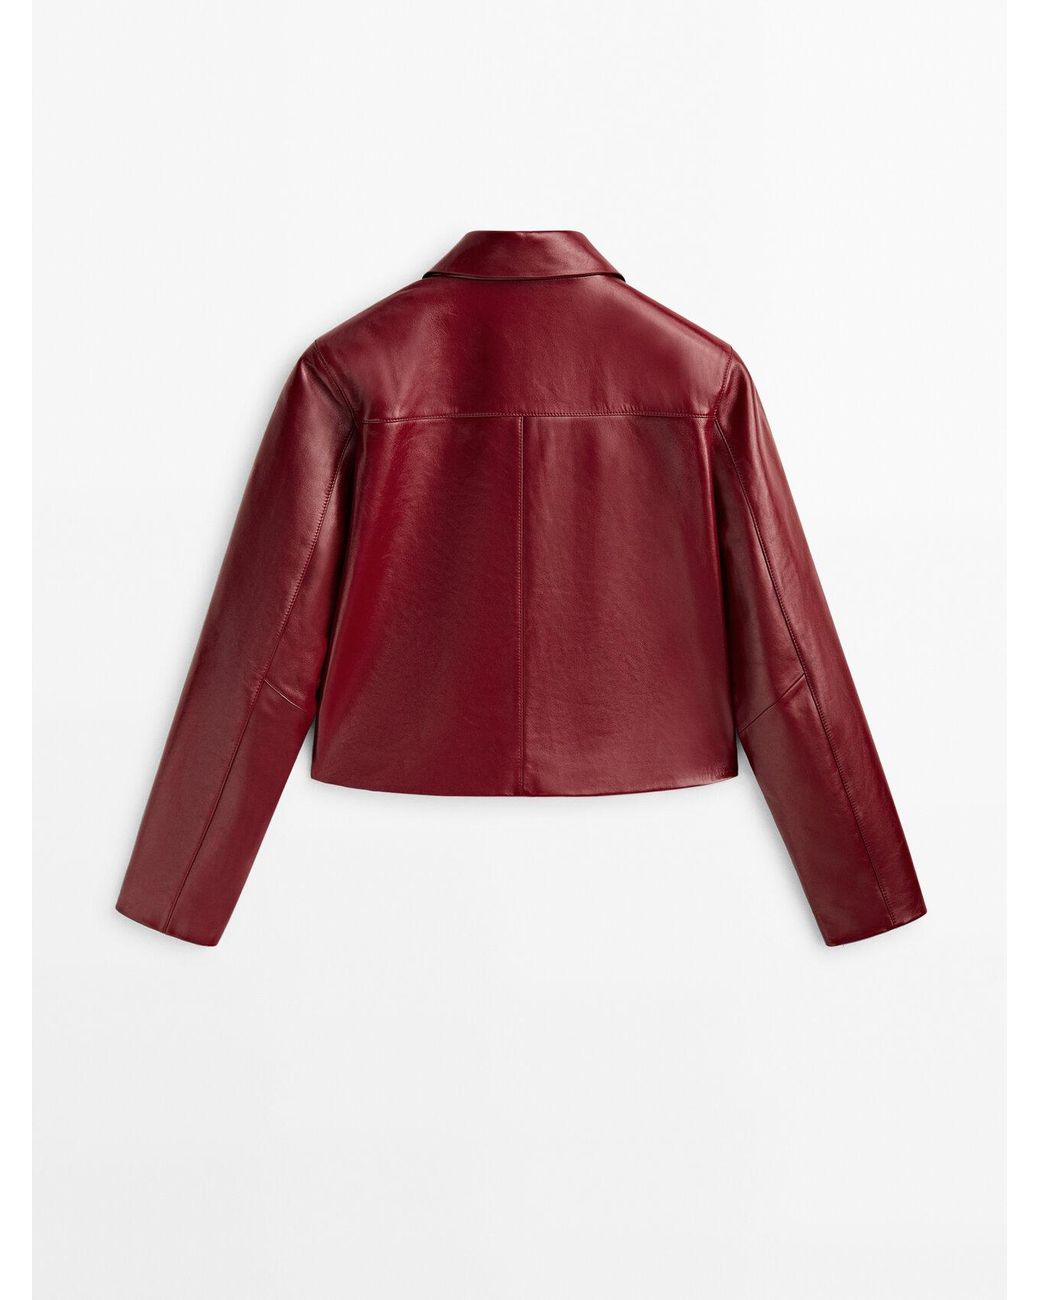 MASSIMO DUTTI Leather Jacket With A Patent Finish in Red | Lyst